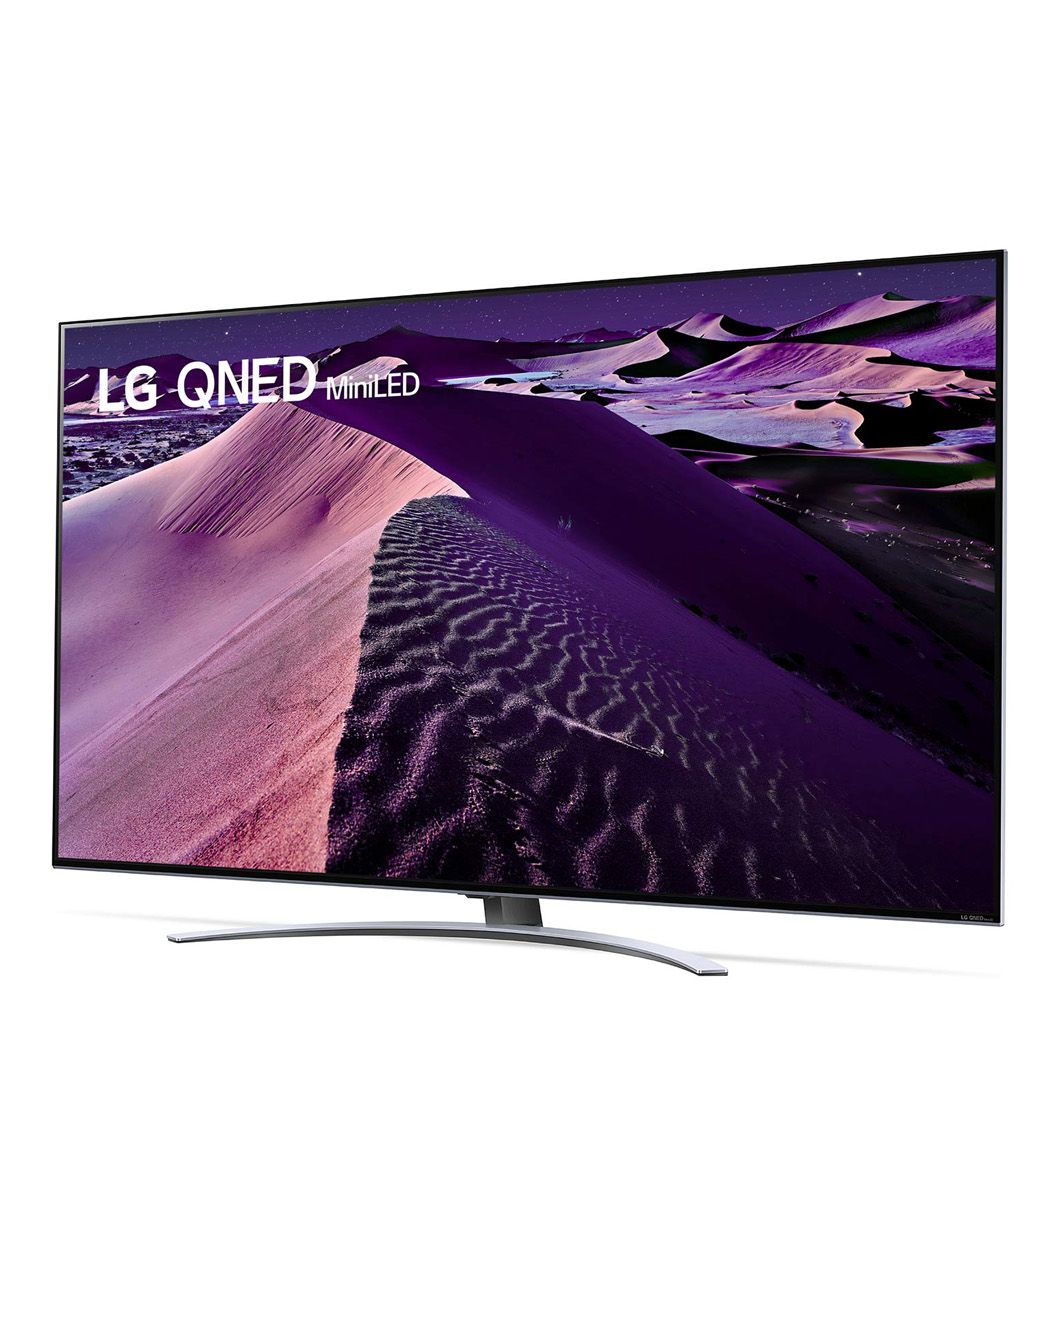 LG QNED MiniLed | TV 75'' Serie QNED87 | QNED 4K, Smart TV, Dolby Vision IQ e Atmos, 75QNED876QB